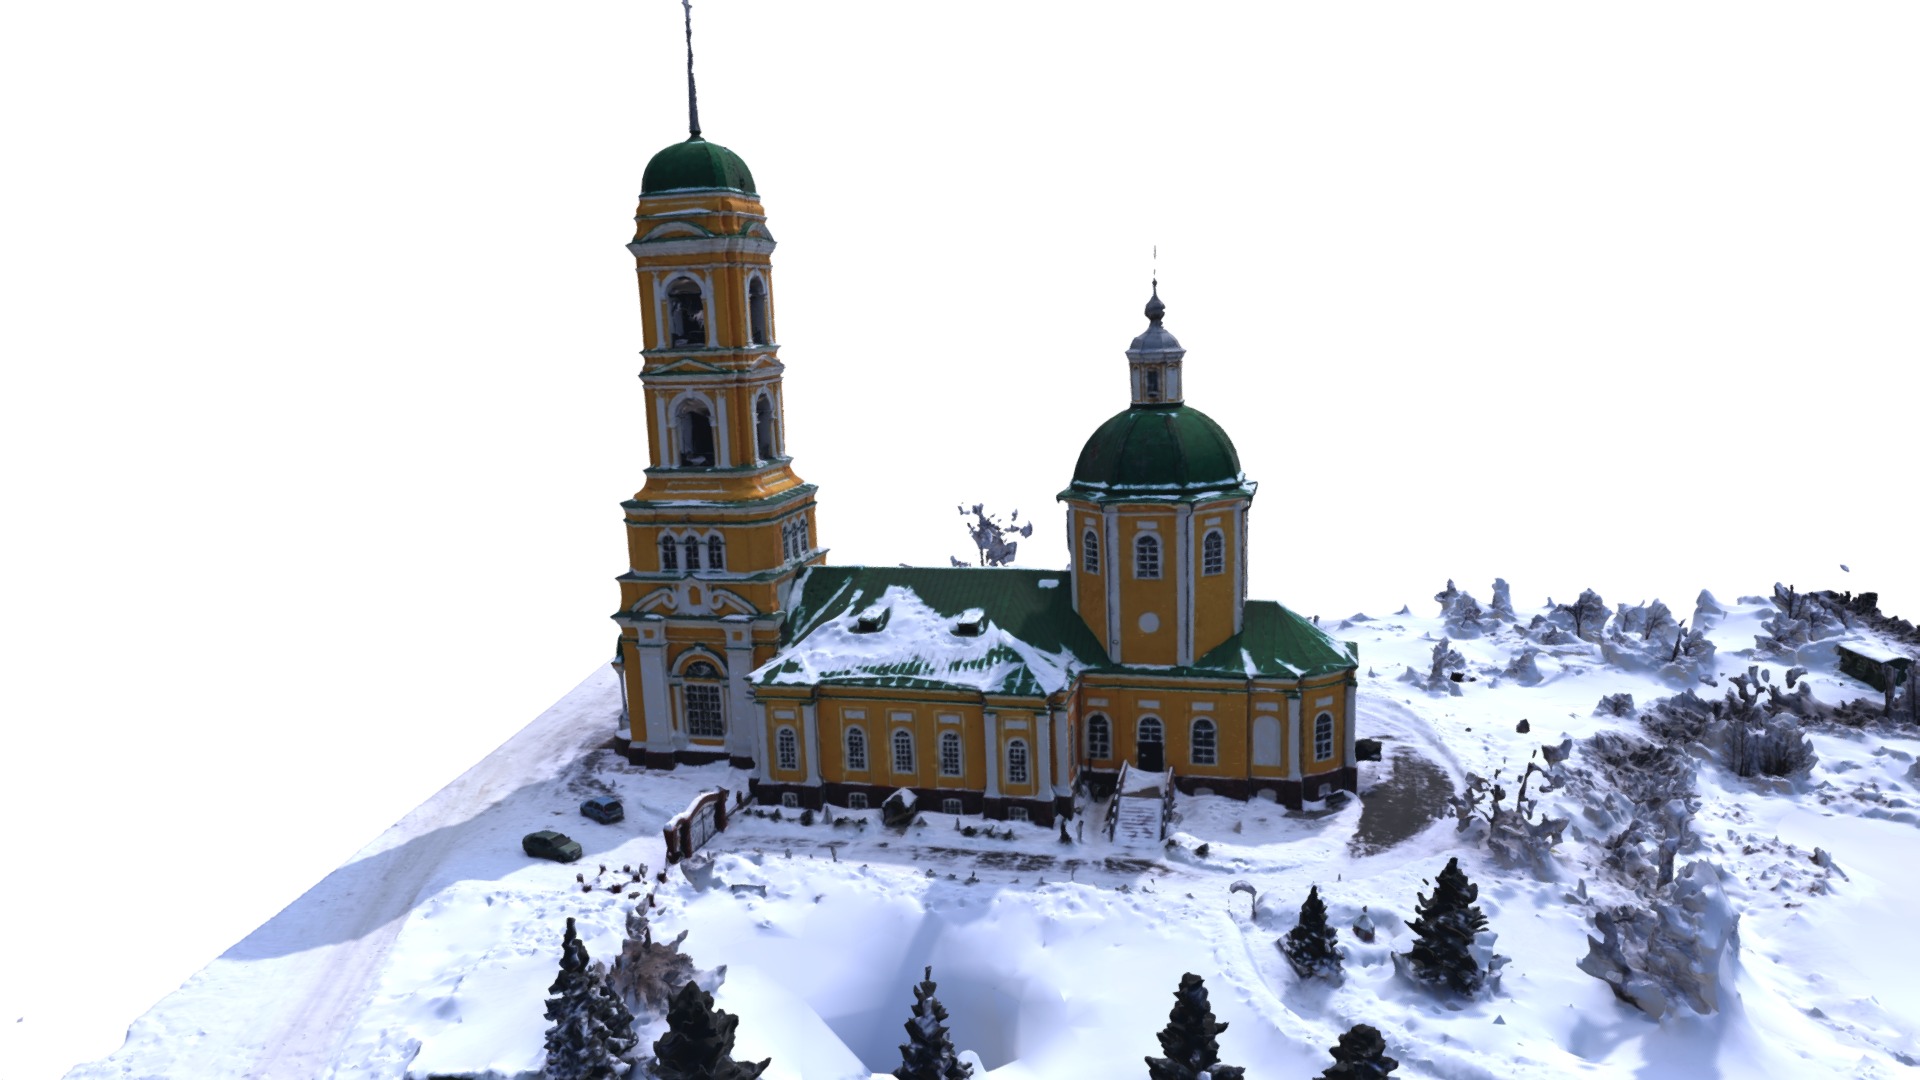 3D model Nikolo-Berezovka church - This is a 3D model of the Nikolo-Berezovka church. The 3D model is about a building with a tower and a dome on top of a snowy hill.